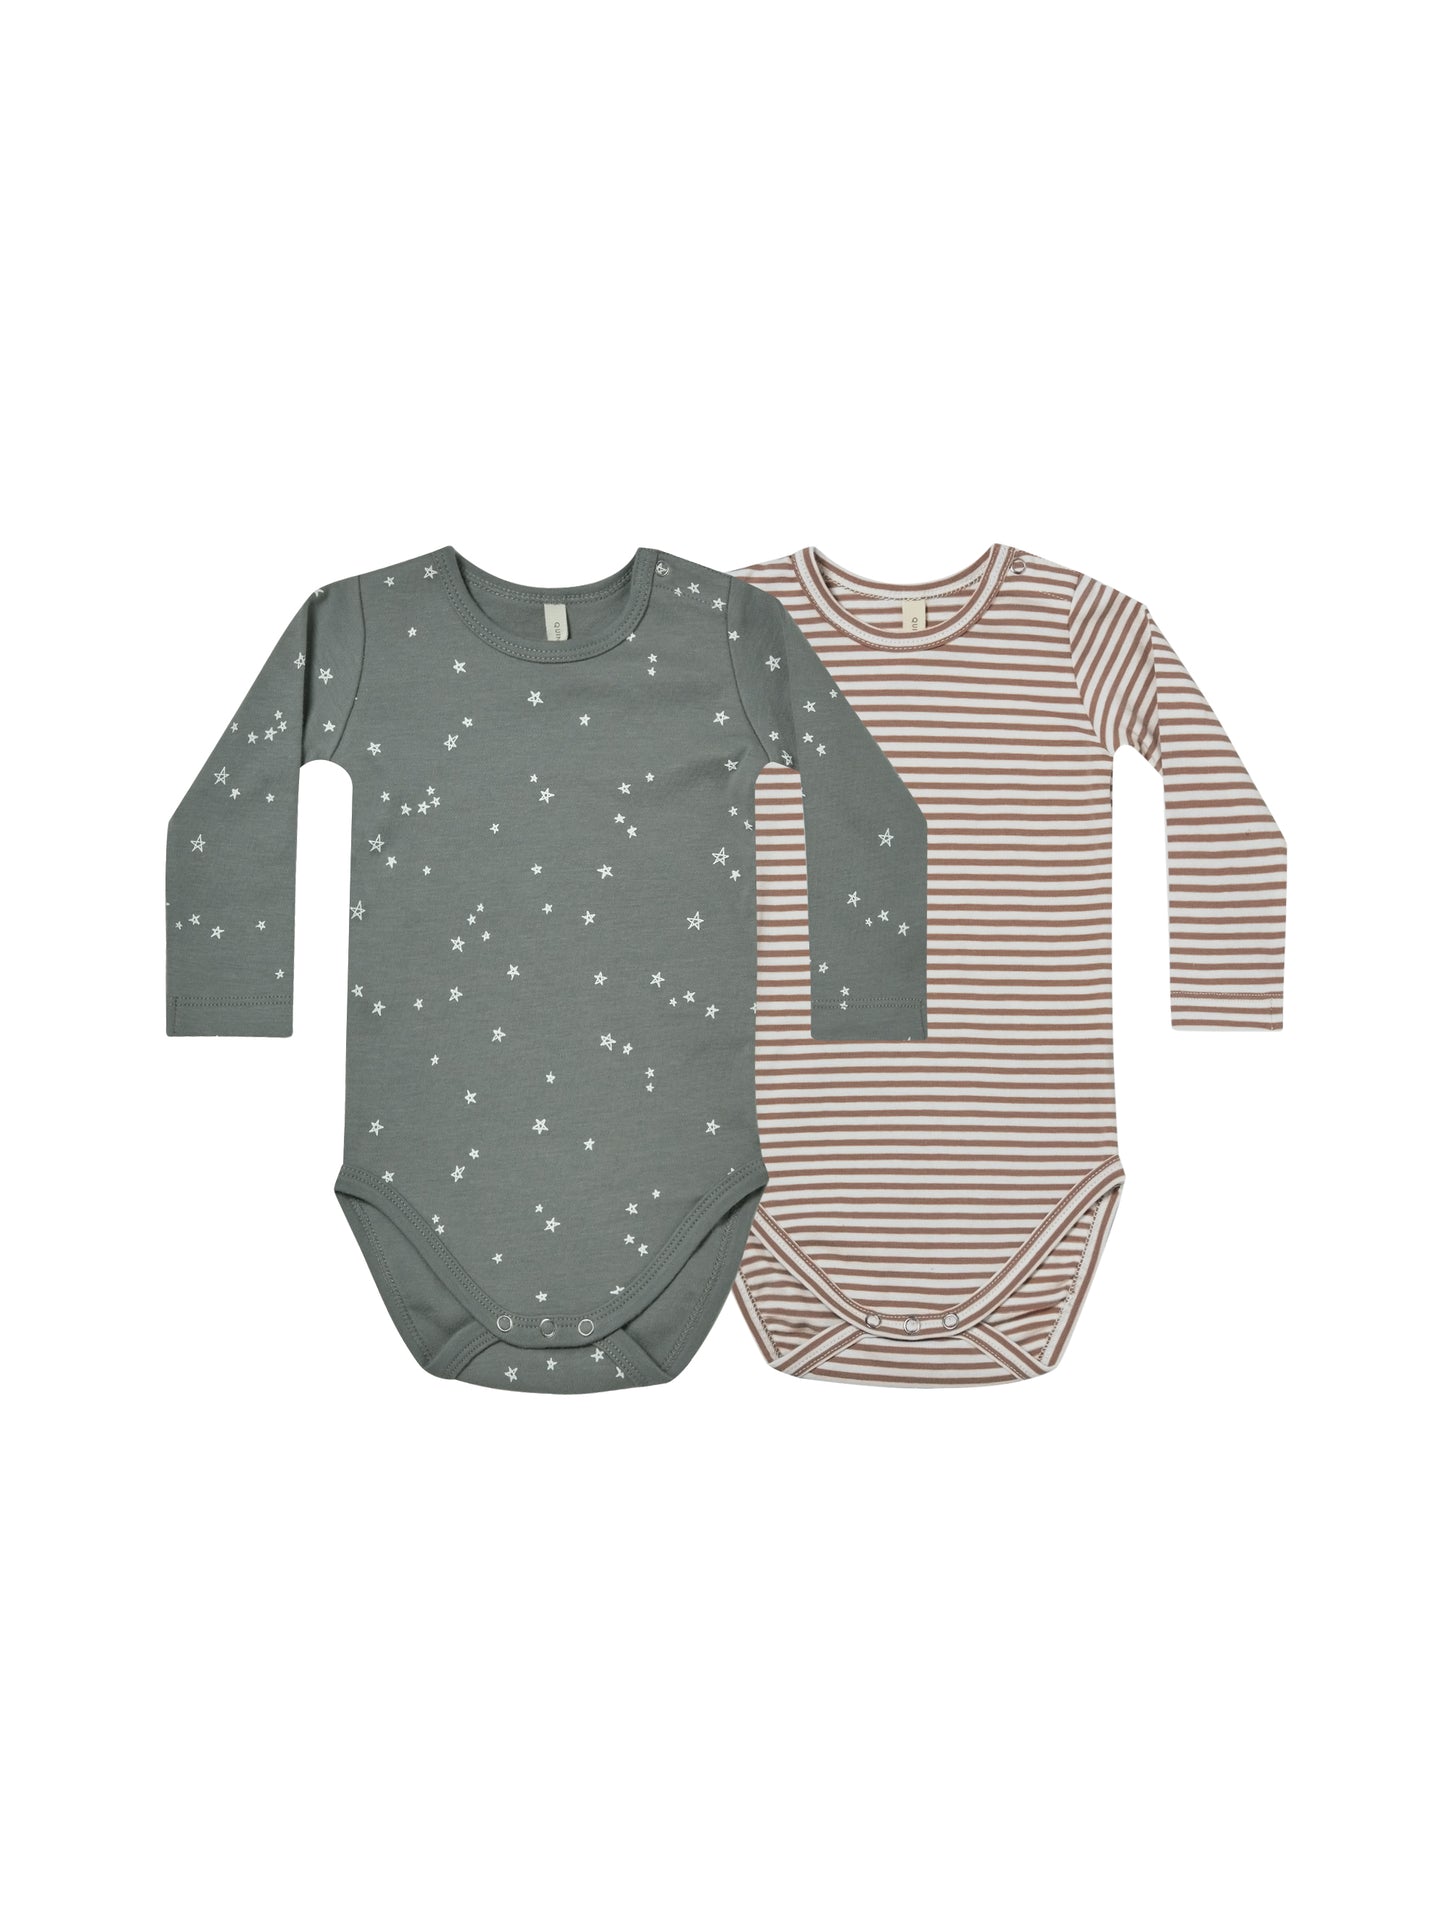 JERSEY BODYSUITS, 2-PACK